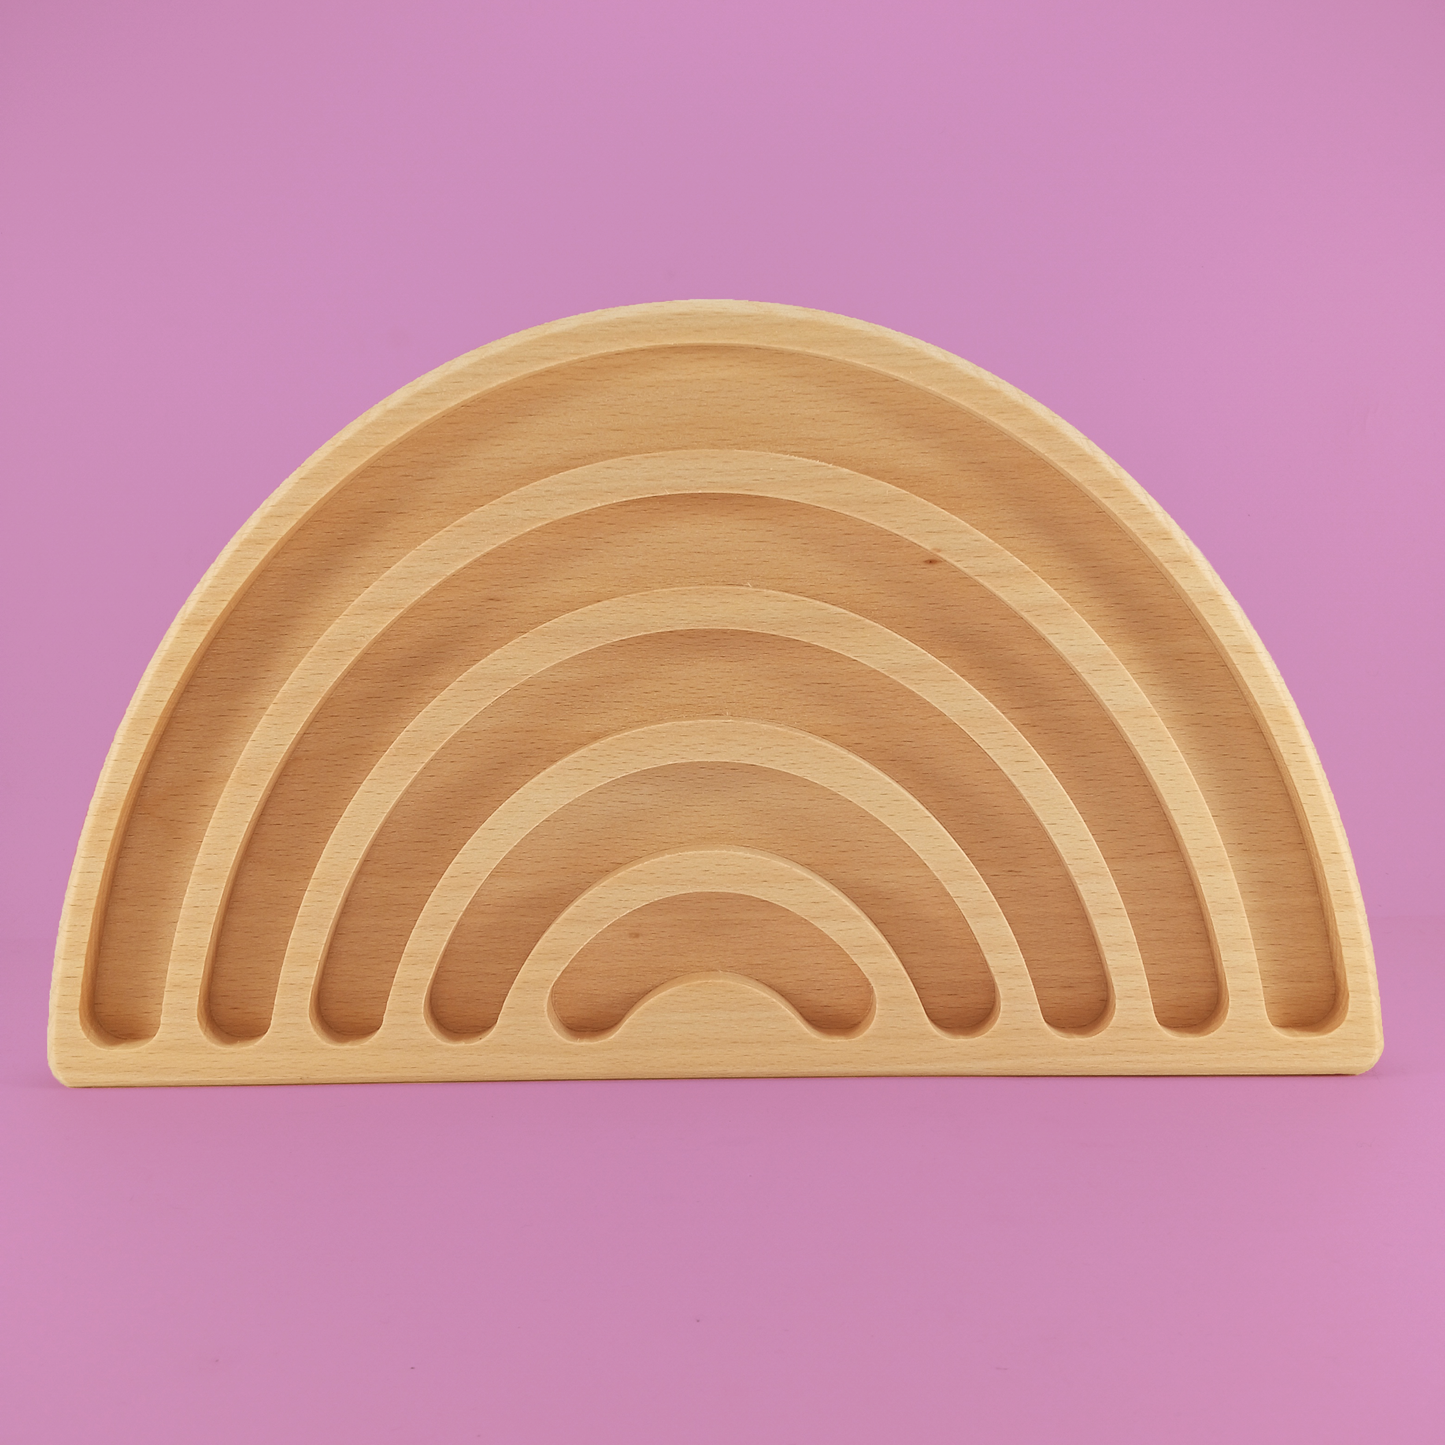 Rainbow shaped wooden plate